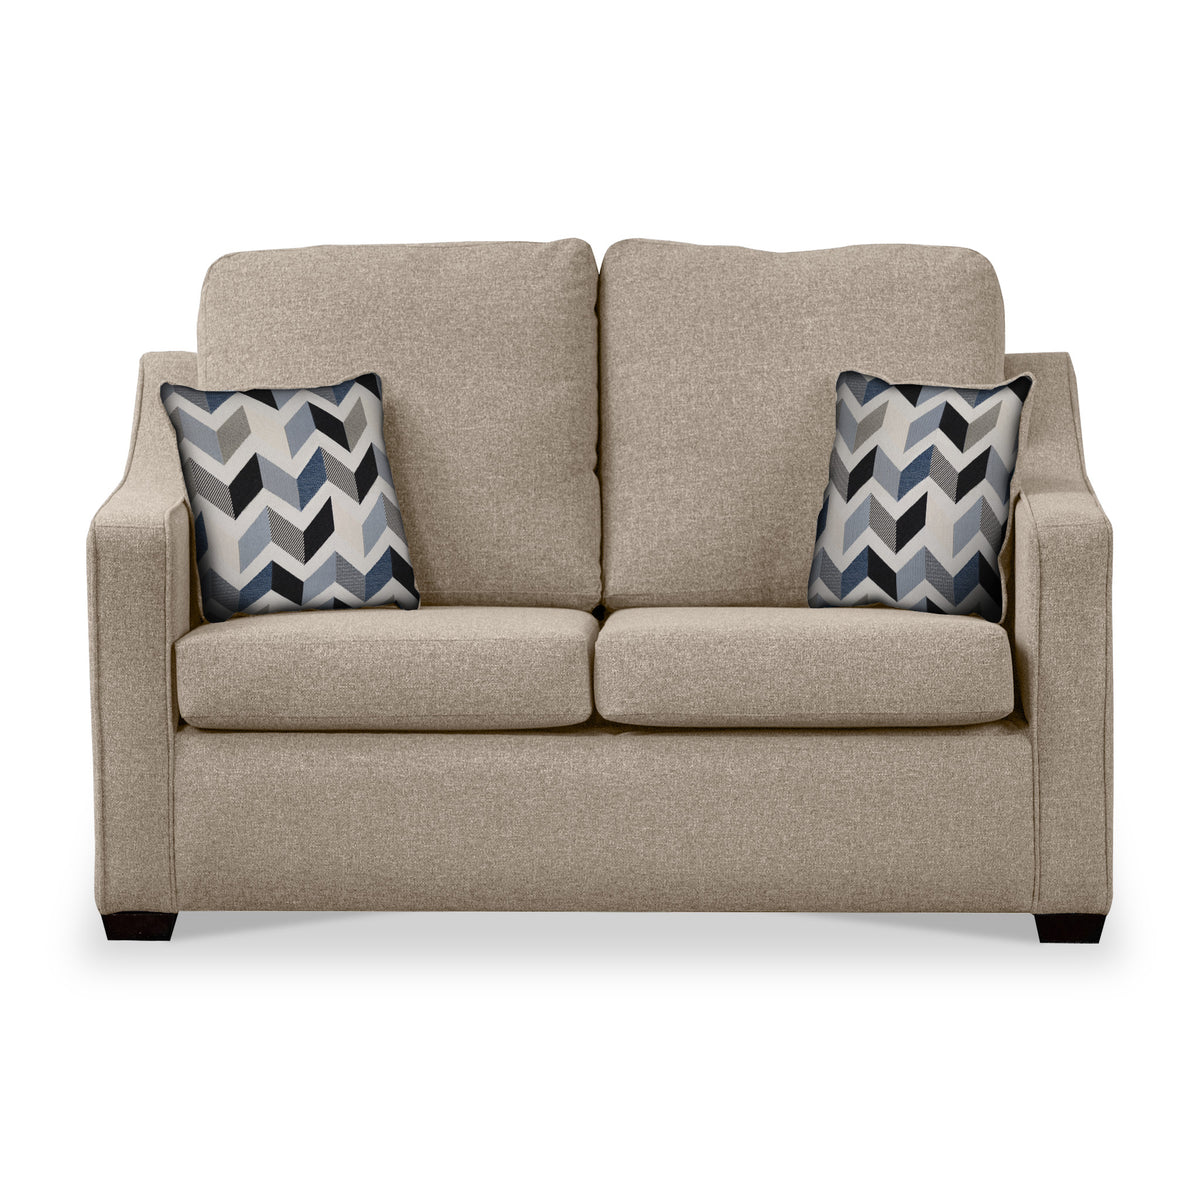 Charlcote Oatmeal Faux Linen 2 Seater Sofabed with Denim Scatter Cushions from Roseland Furniture